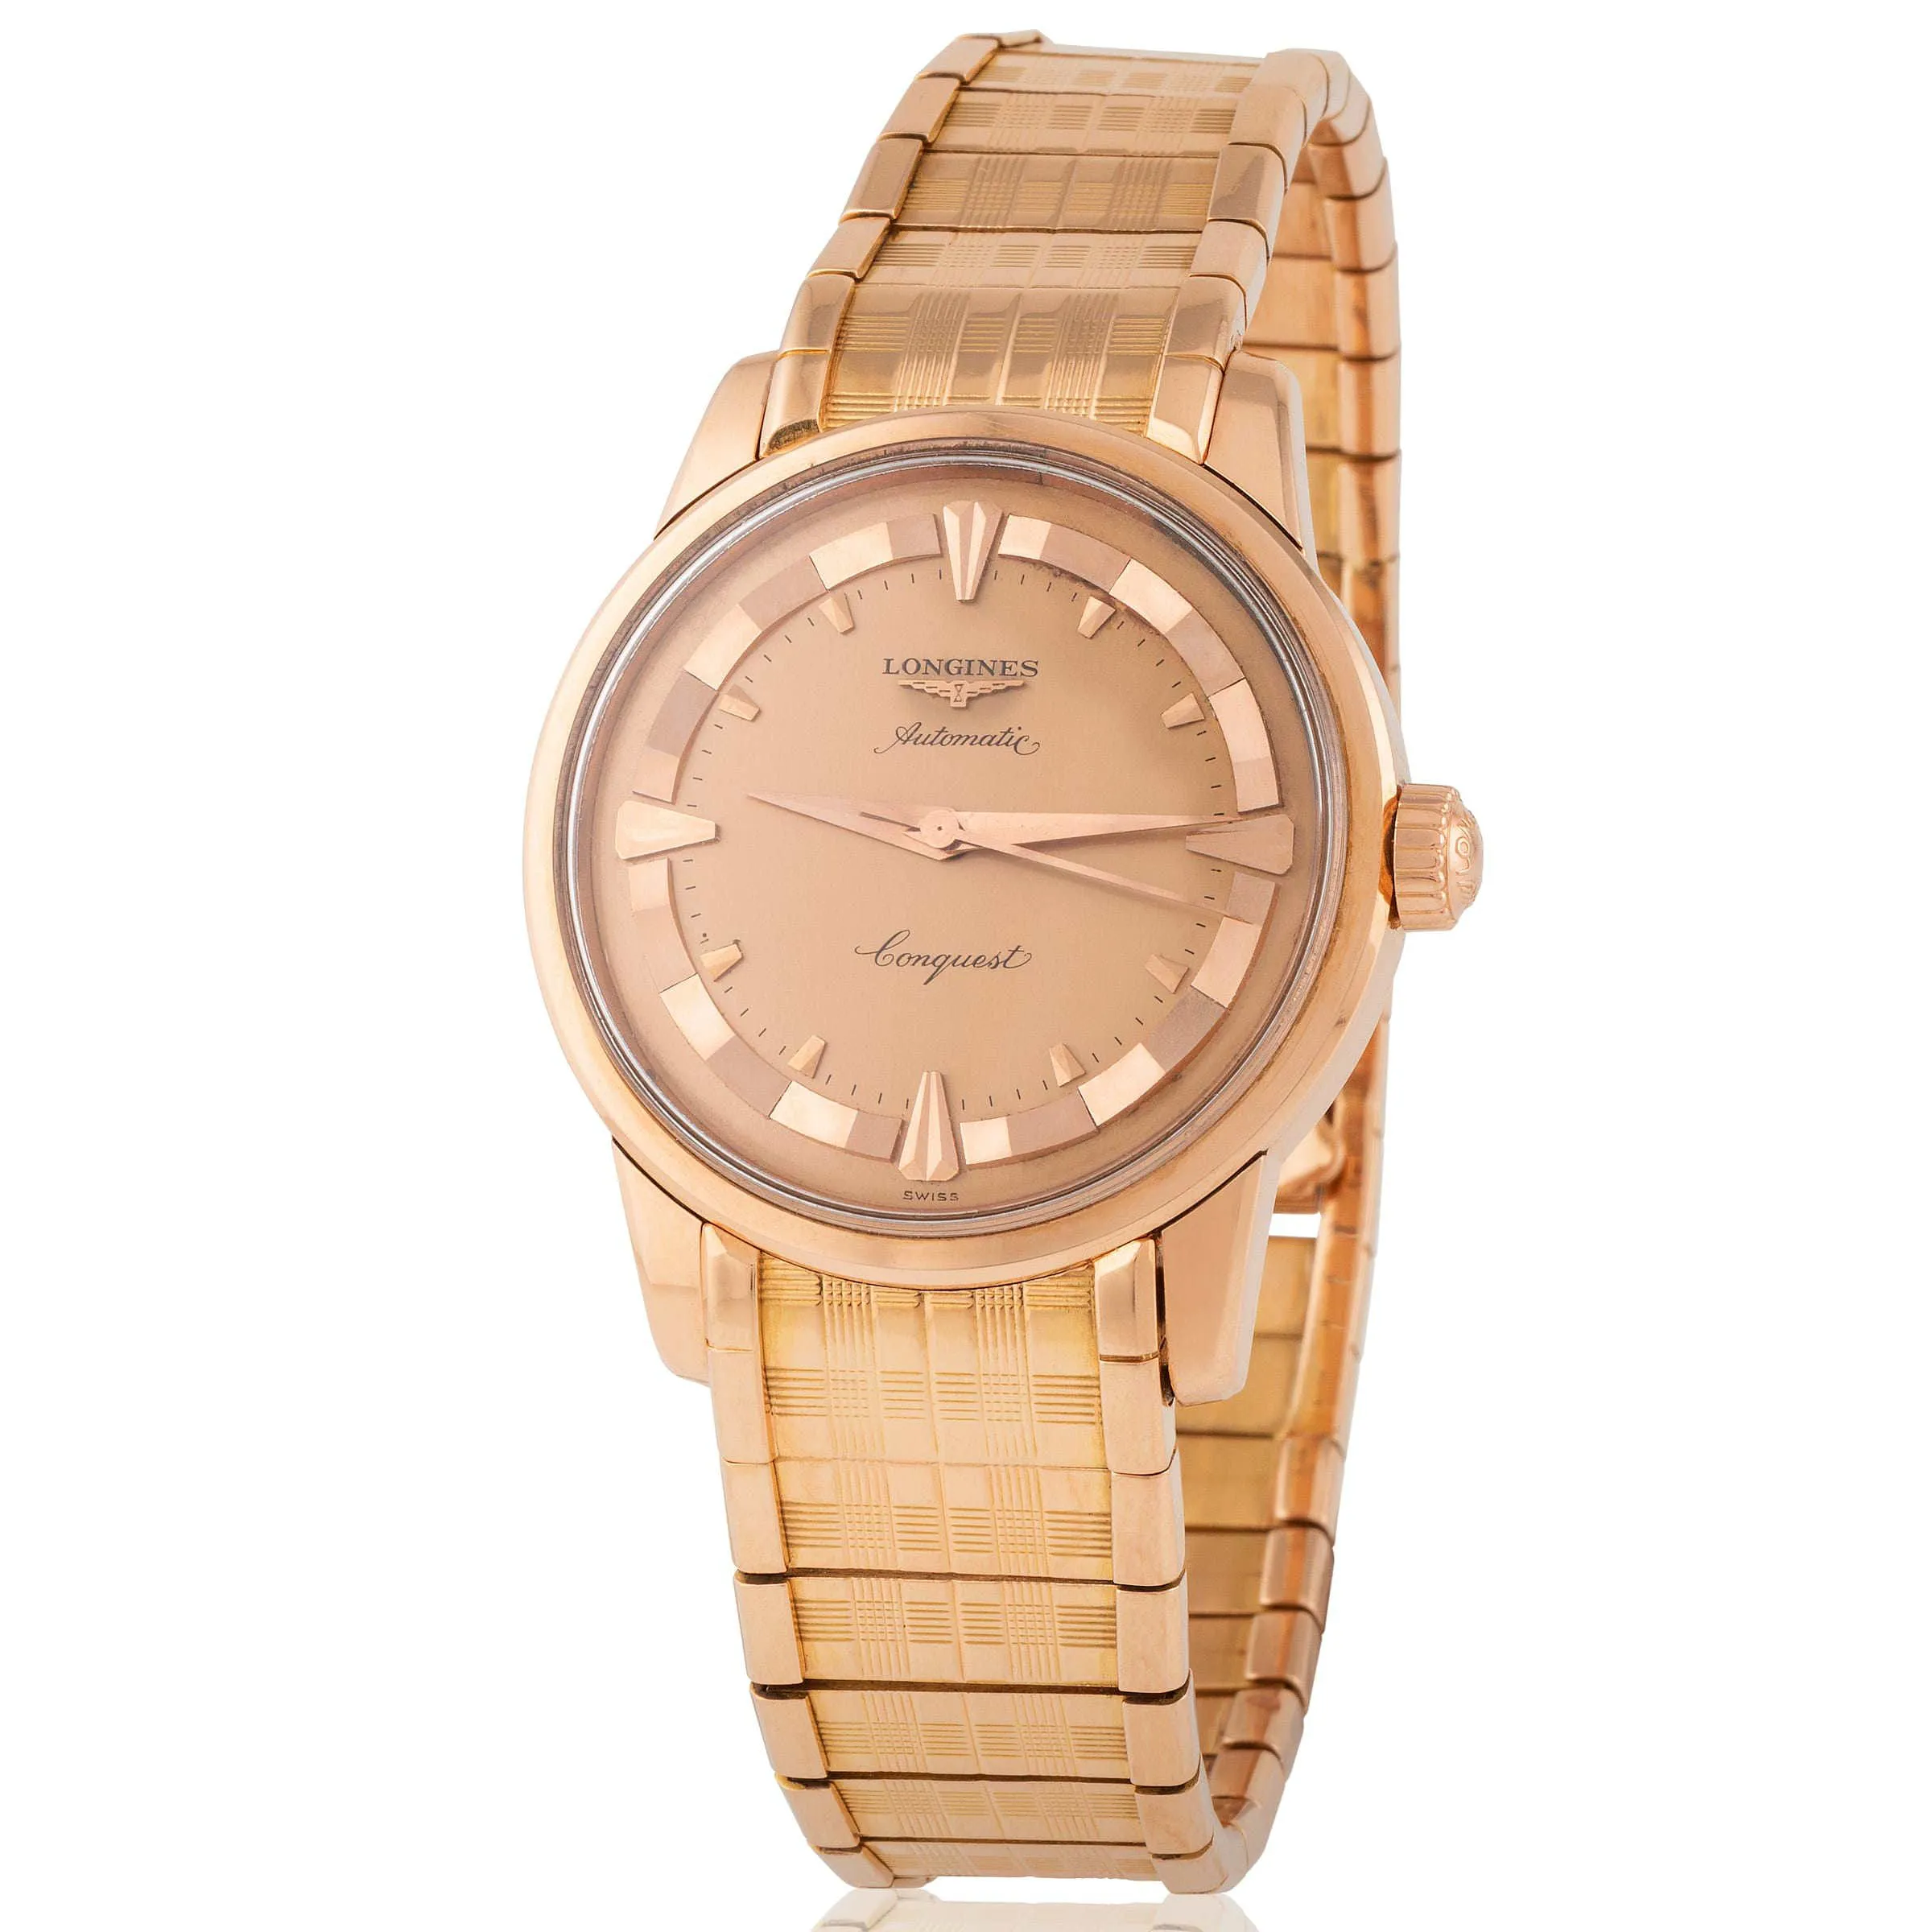 Longines Conquest 9001 35mm Pink gold Champagne